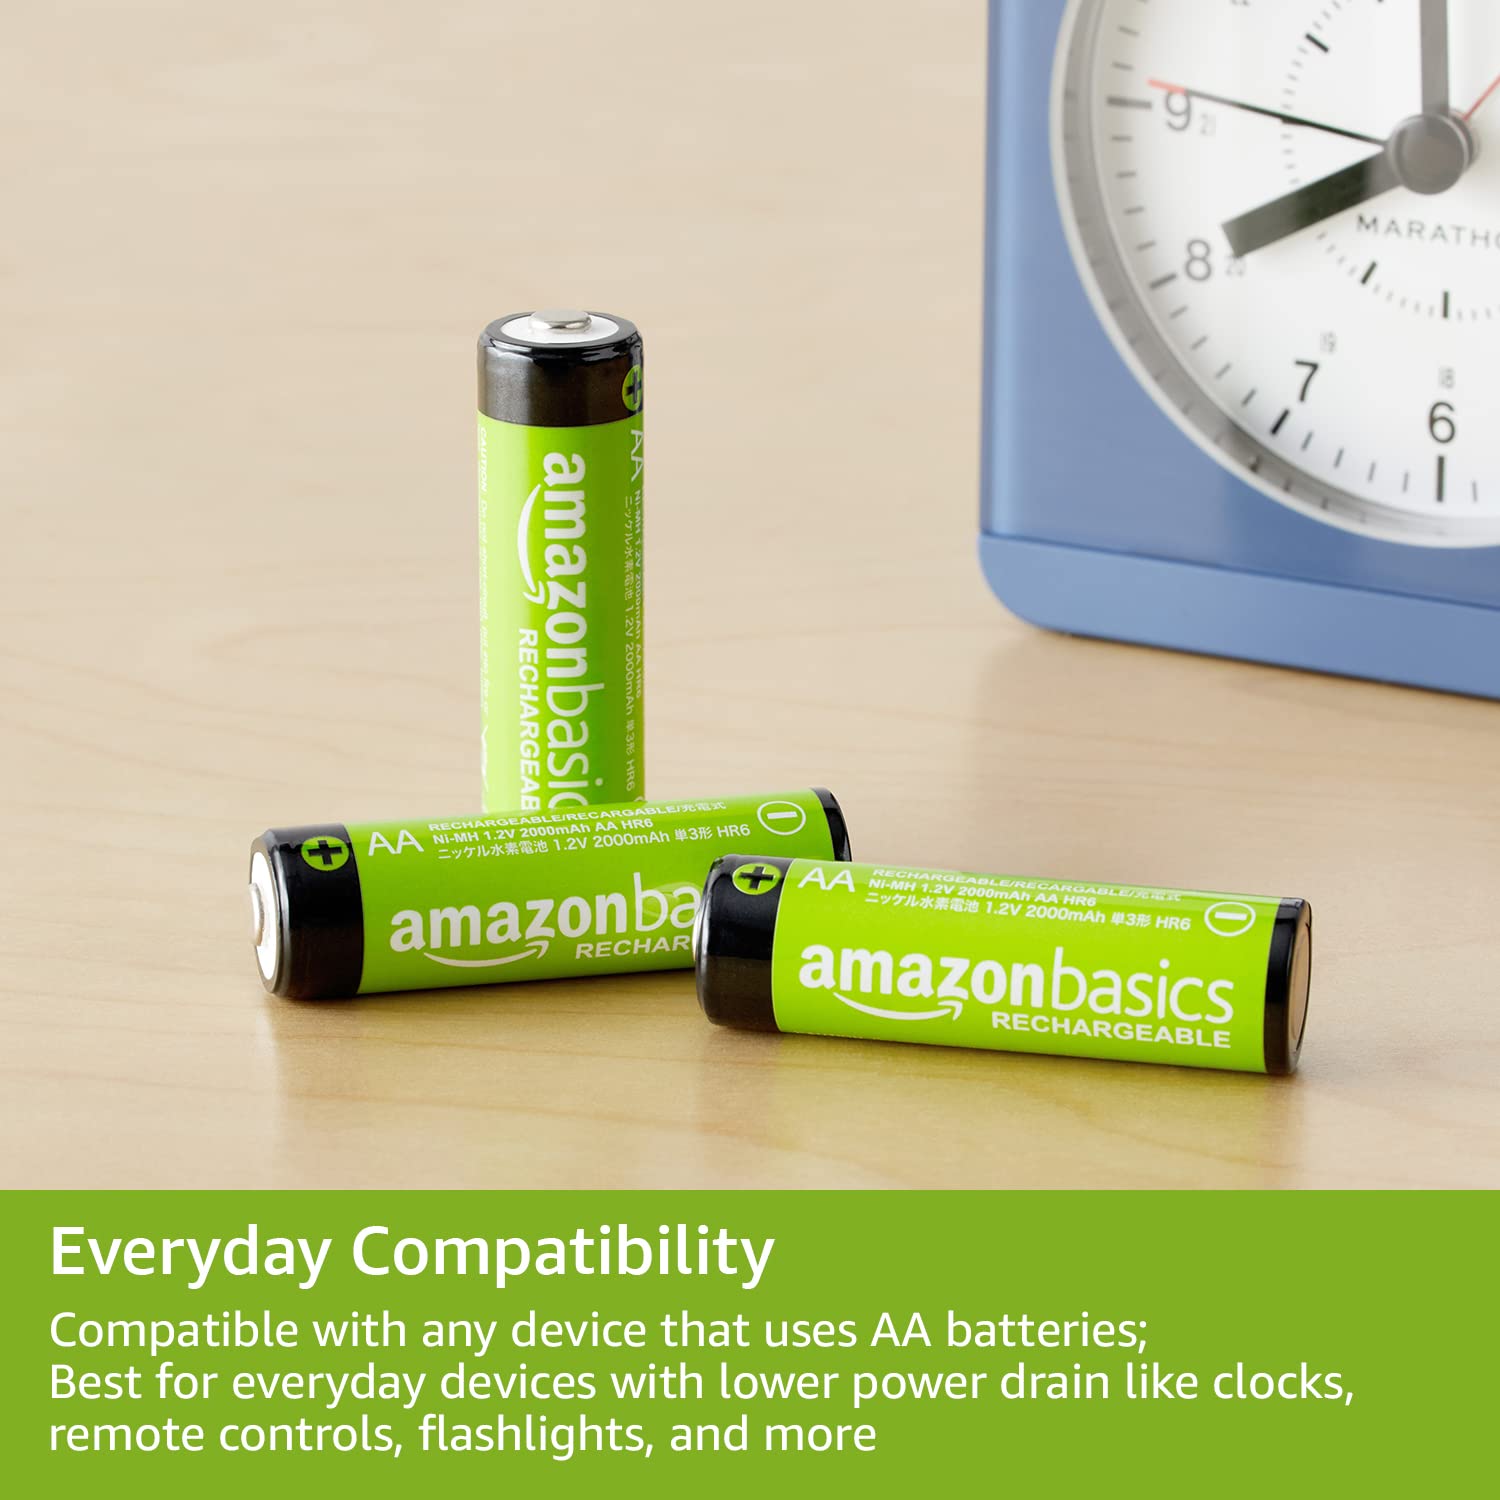 Amazon Basics 24-Pack Rechargeable AA NiMH Batteries, 2000 mAh, Recharge up to 1000x Times, Pre-Charged